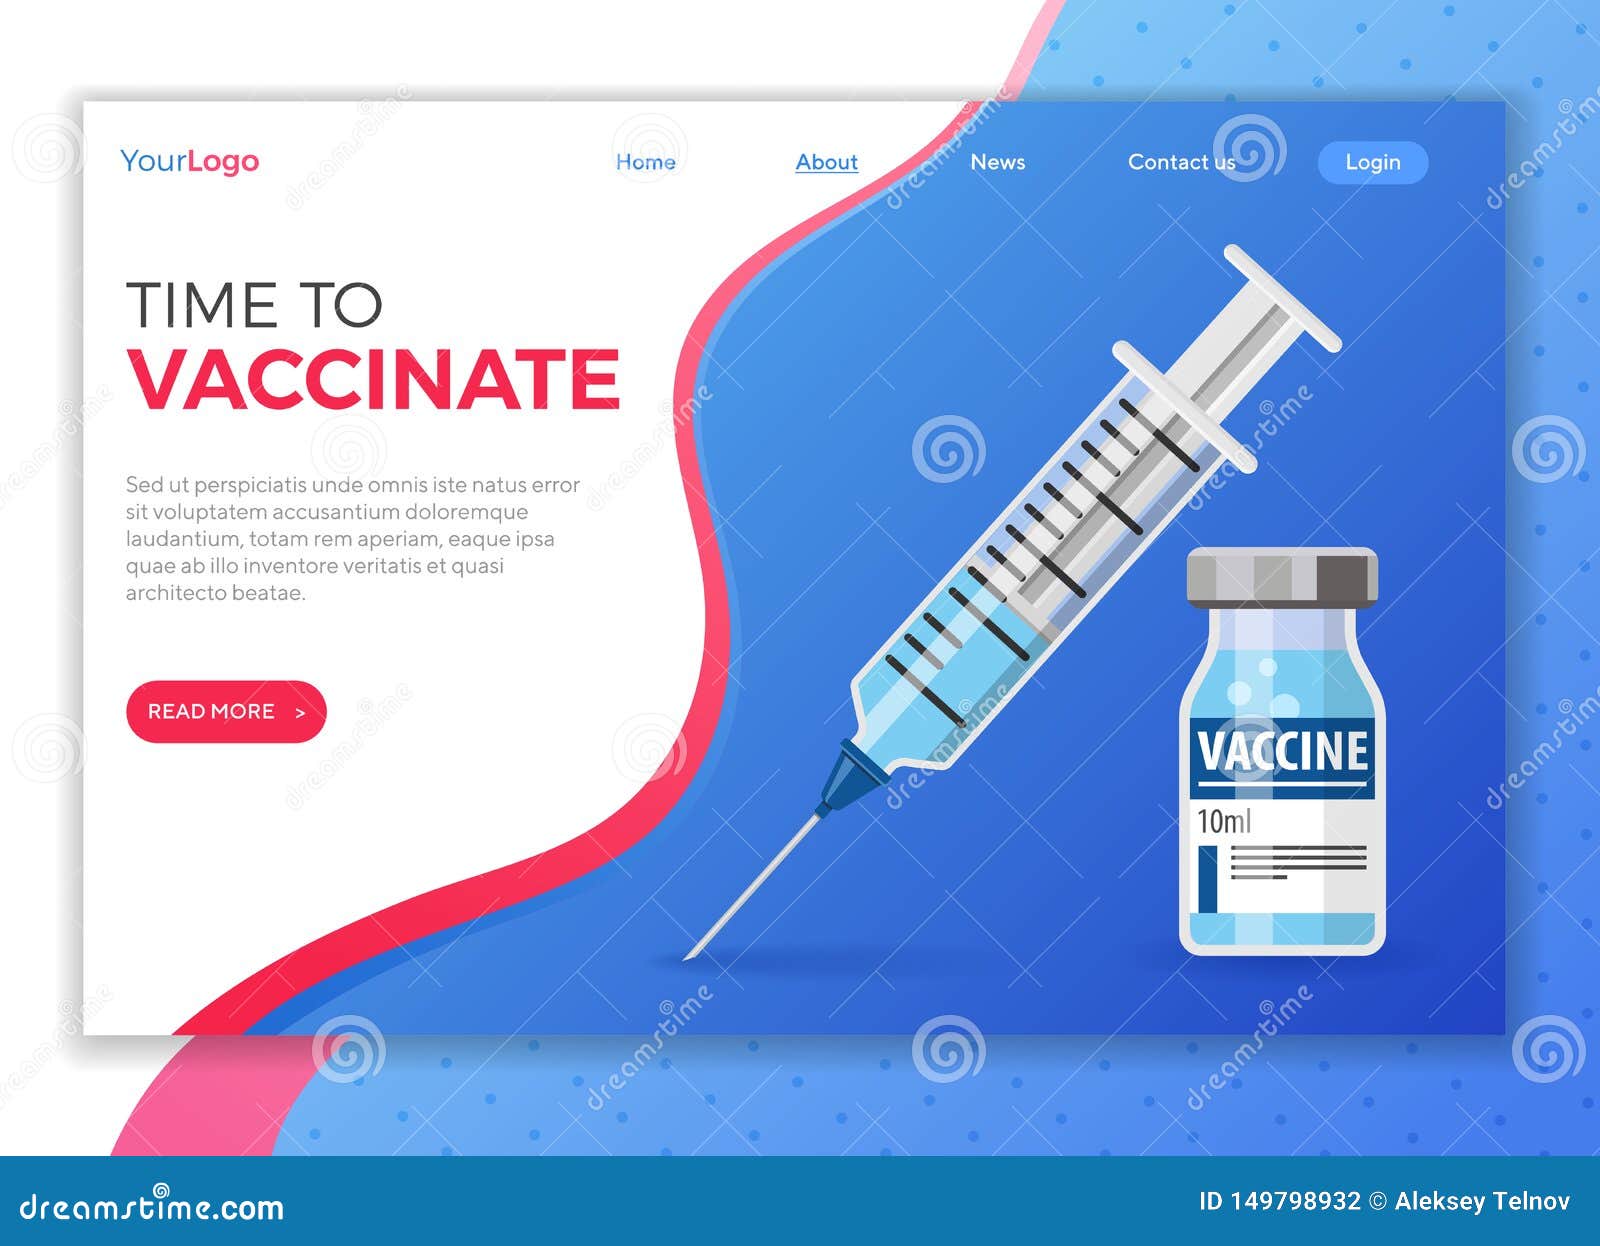 plastic medical syringe and vial vaccine icon